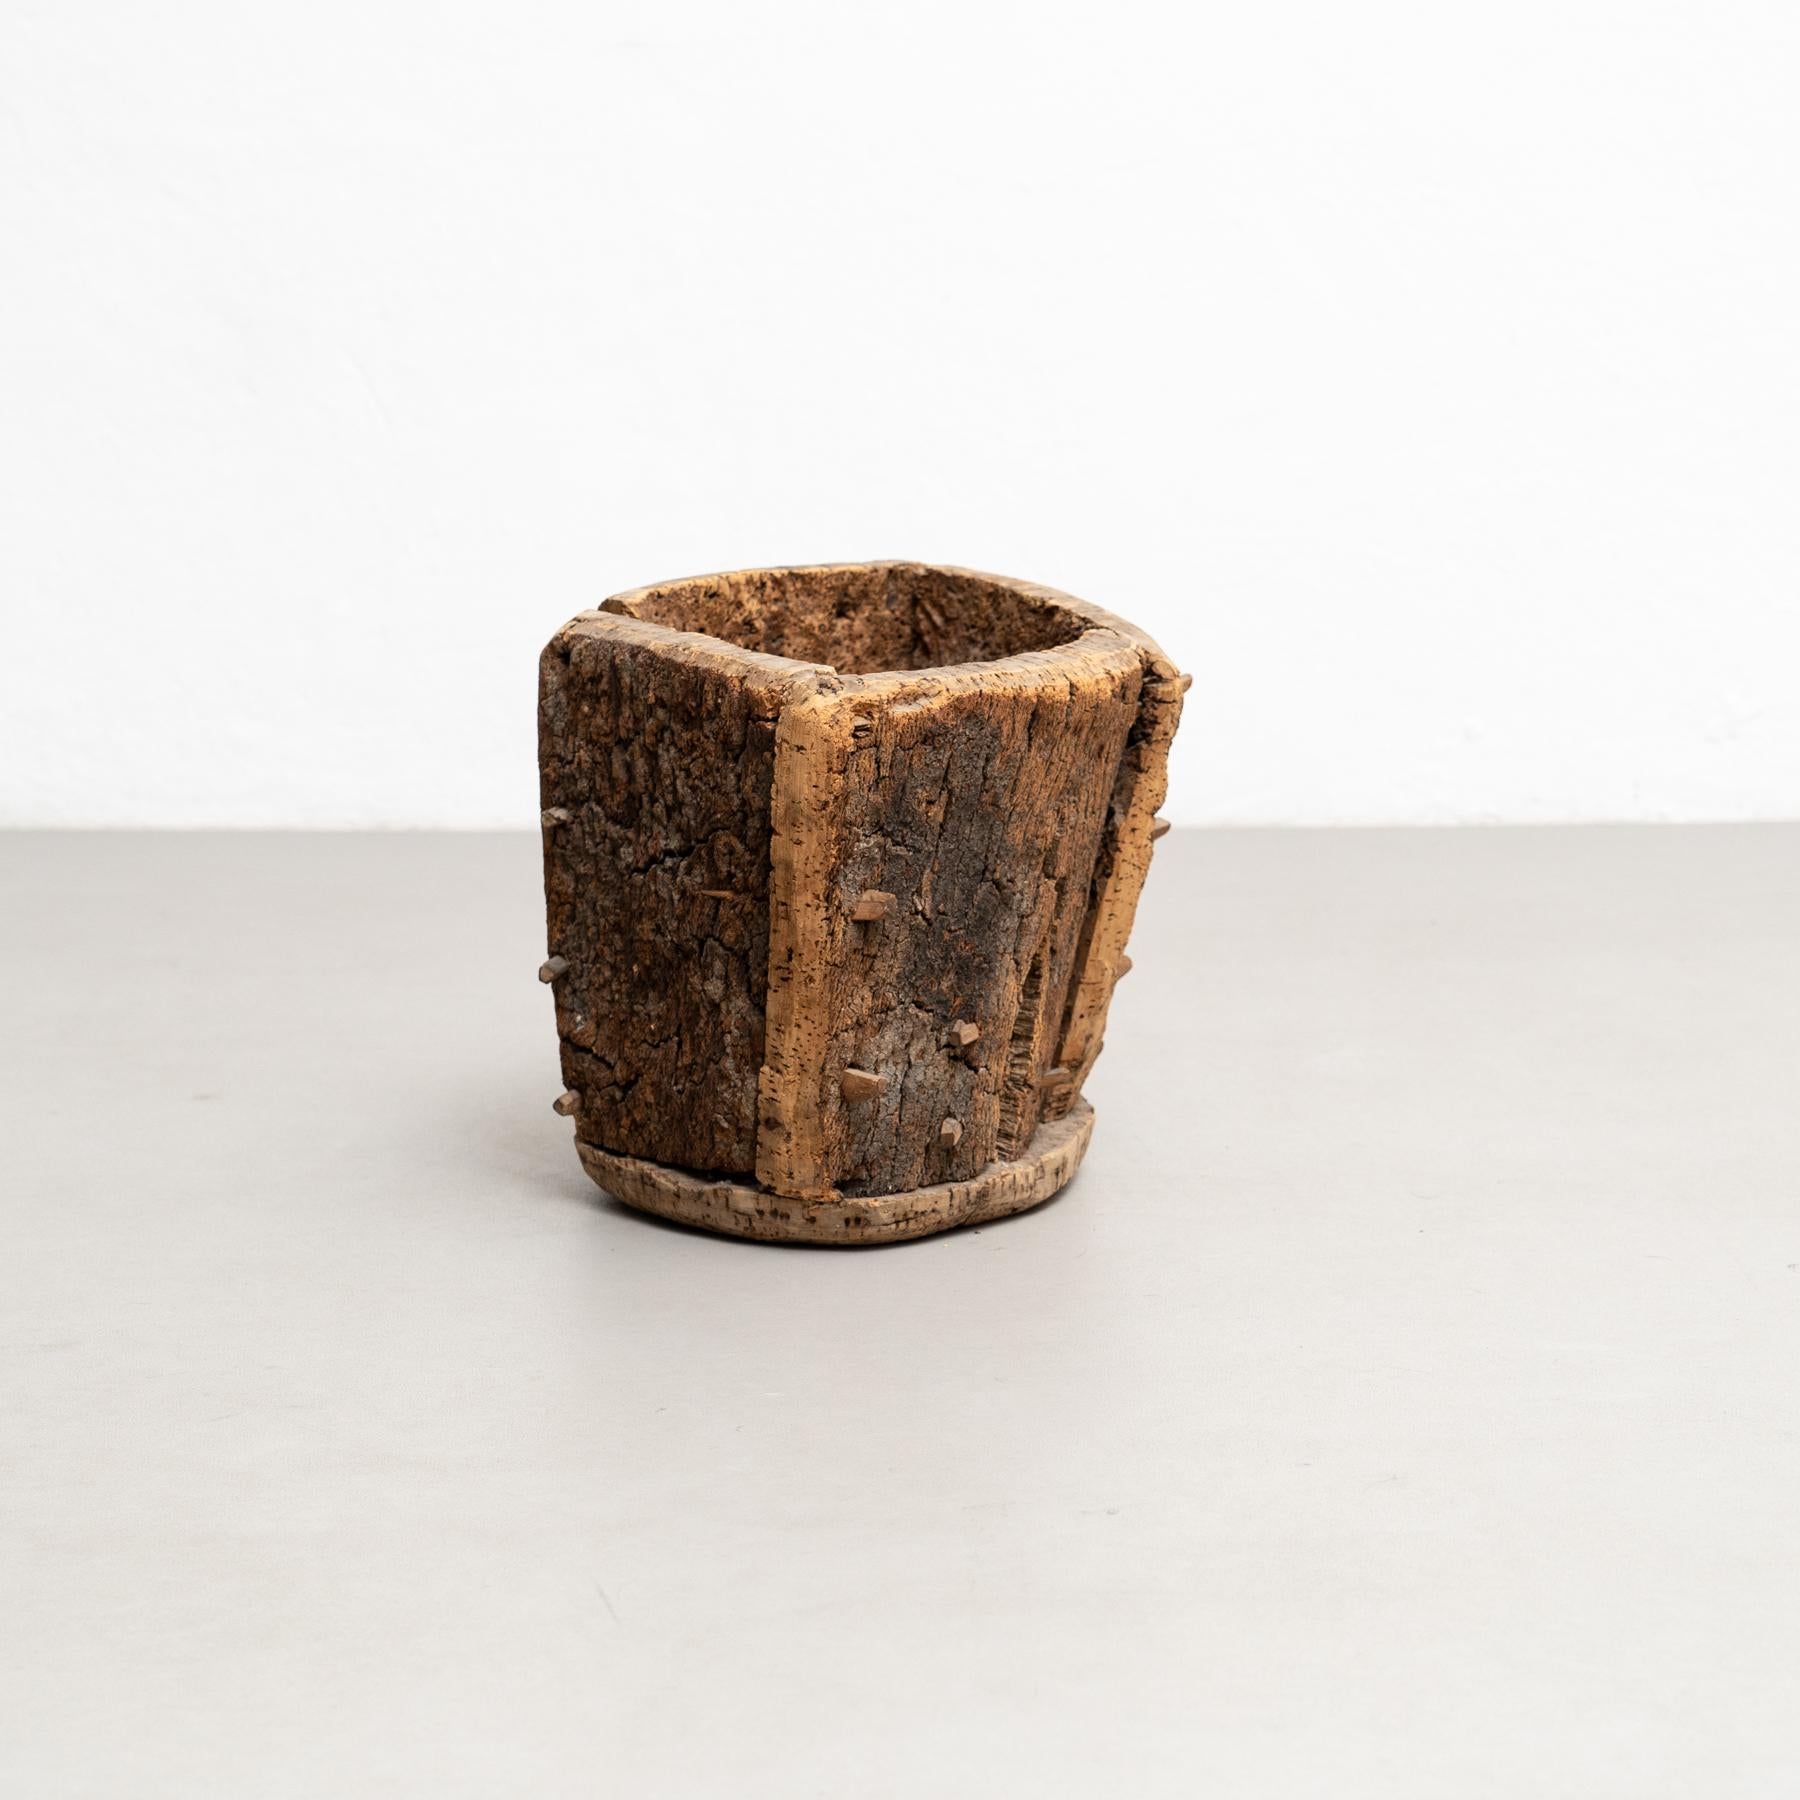 French Brutalist Charm: Early 20th Century Cork Trash Bin with Time-Worn Charachter